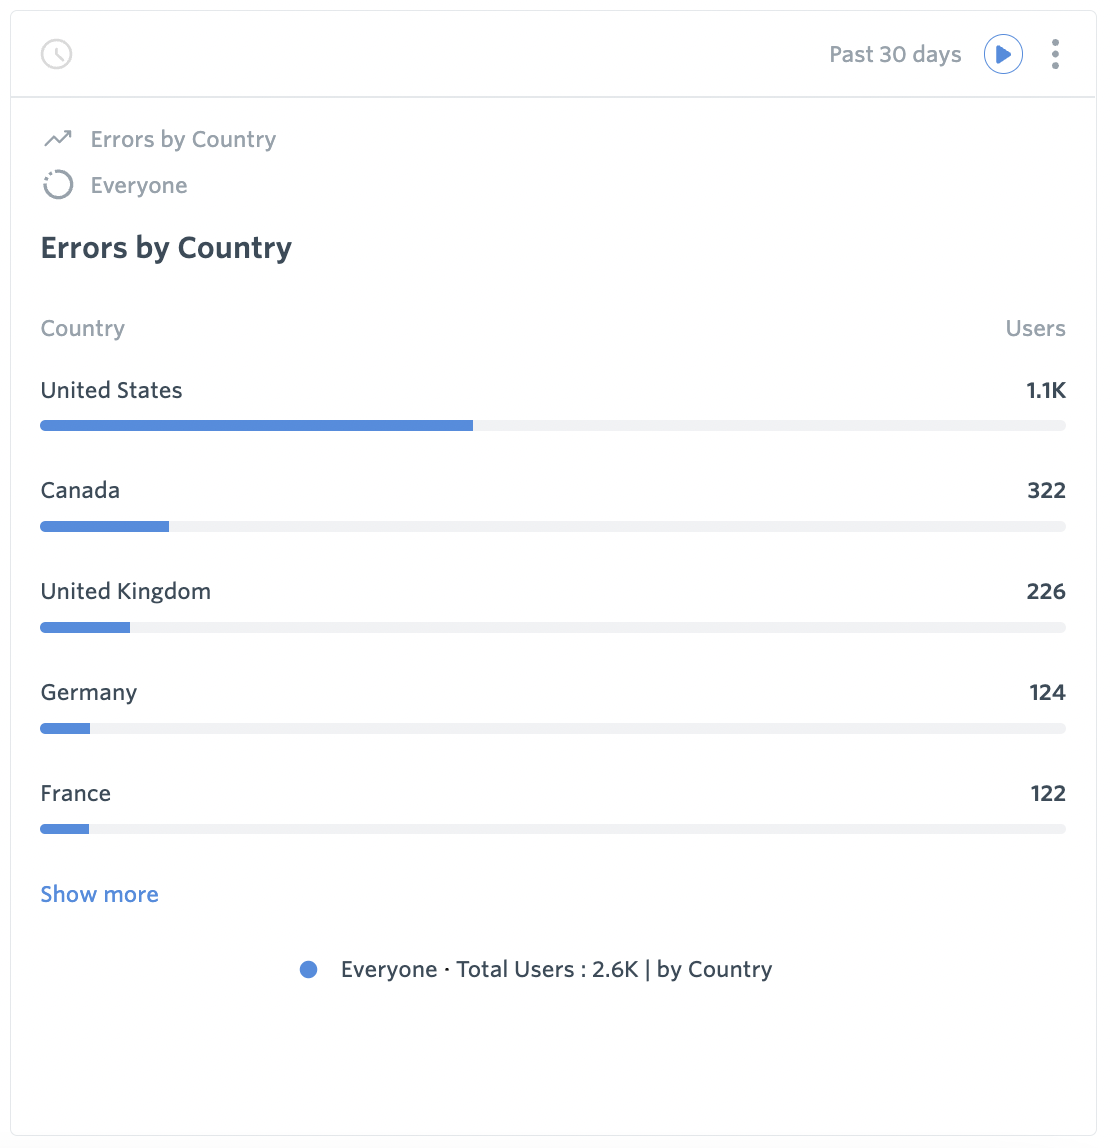 Errors by Country